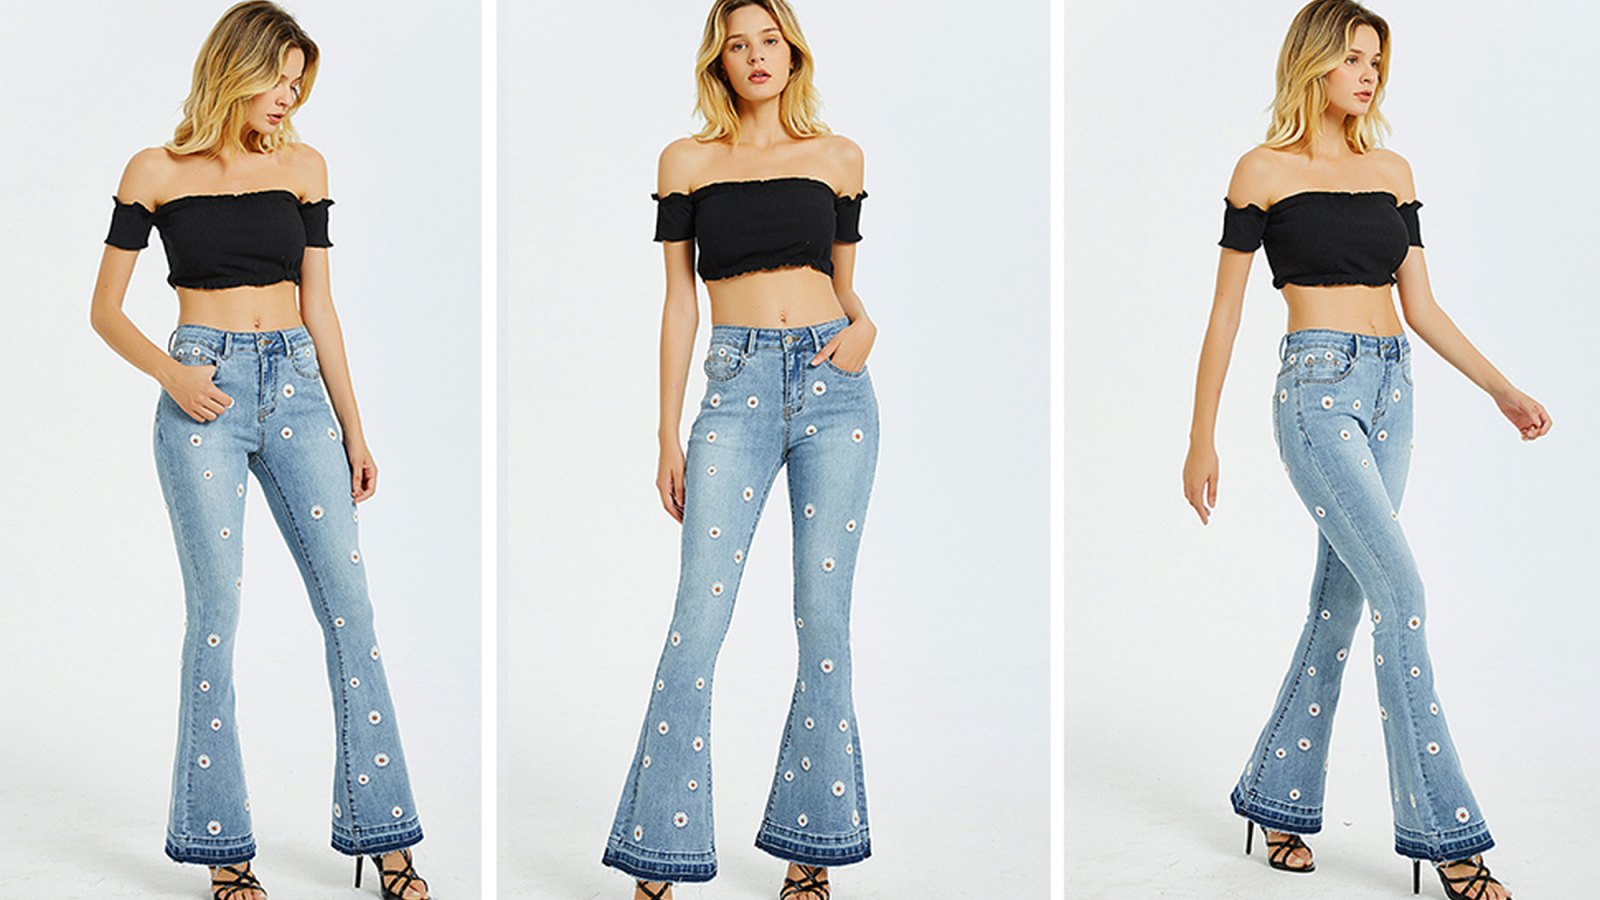 Anna-Kaci '70s-Inspired Jeans Are the Cutest Ever